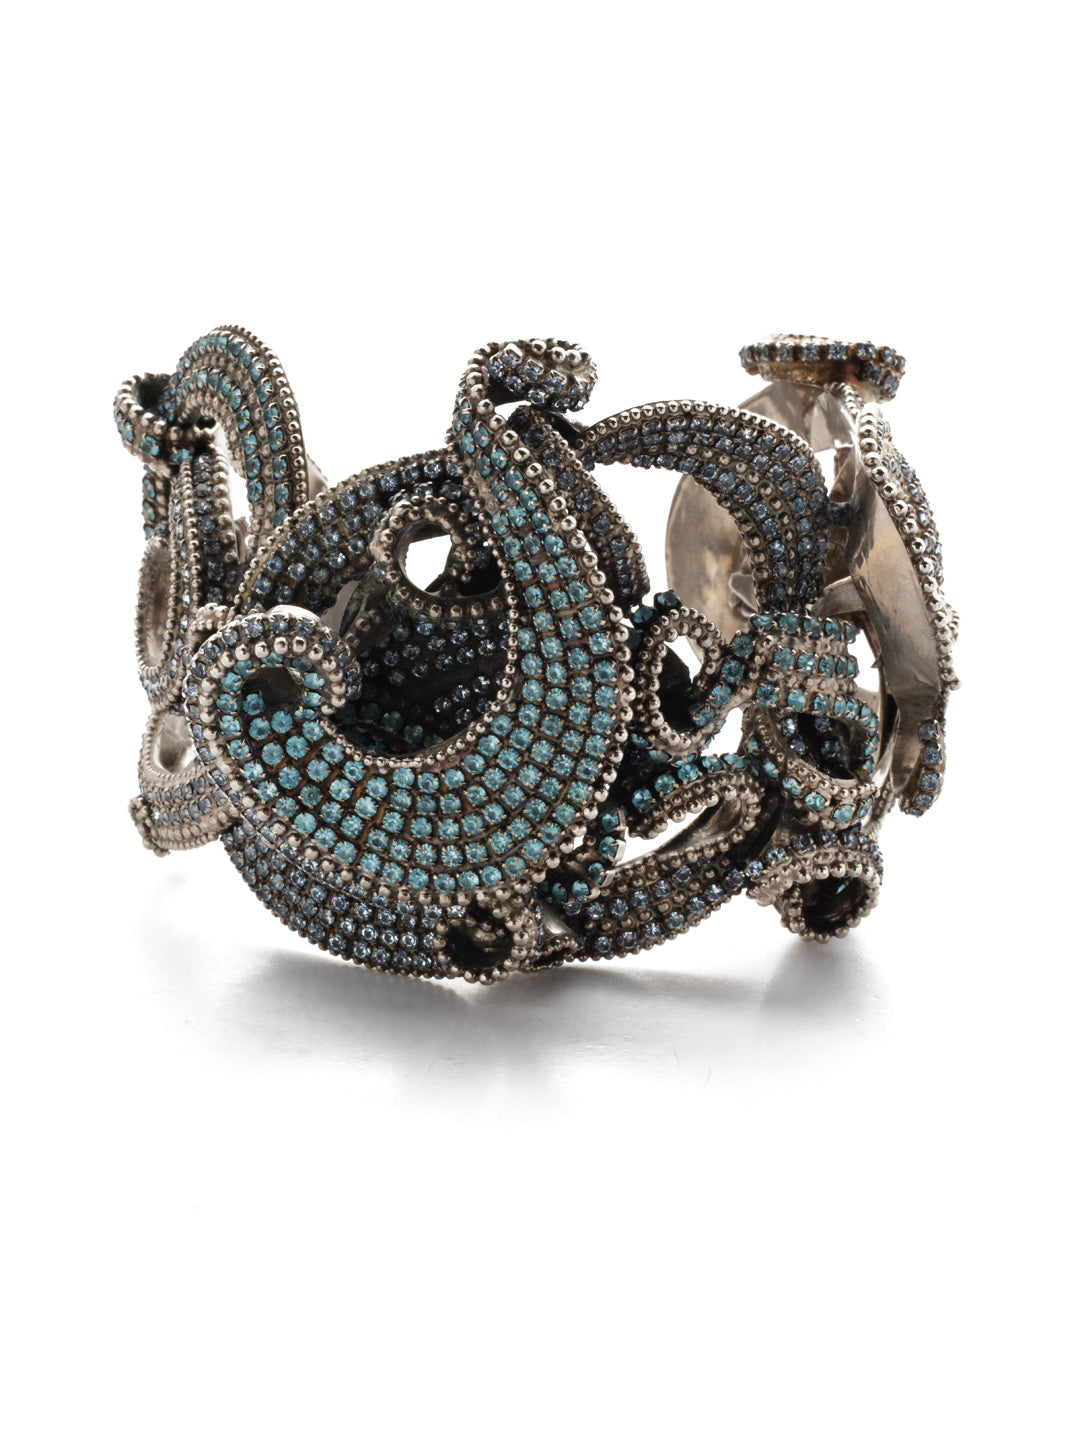 Aquatic Azure Cuff Bracelet - BSP1ASAQU - <p>Reminiscent of a glamorous beach-side wedding, the Aquatic Cuff Bracelet's curls of rhinestone chain studded with blue crystals boldly swirl around your wrist. Taste the salt on your lips, feel the warm sun on your skin, and enjoy the beauty that this bracelet represents - even when you are a world away from the beach. From Sorrelli's Aquamarine collection in our Antique Silver-tone finish.</p>